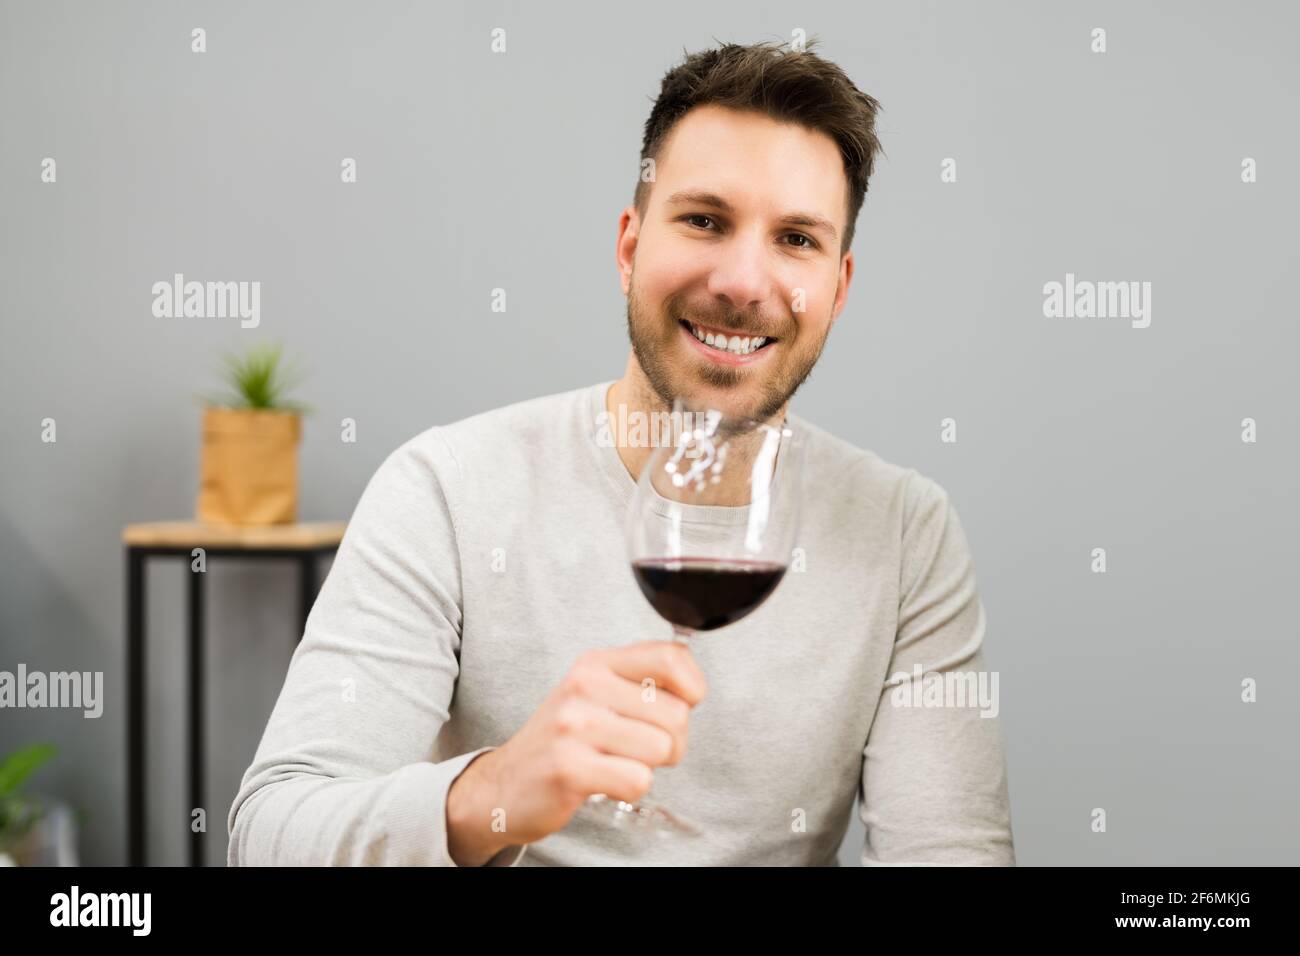 Man Drinking Wine Alcohol In House Room Stock Photo